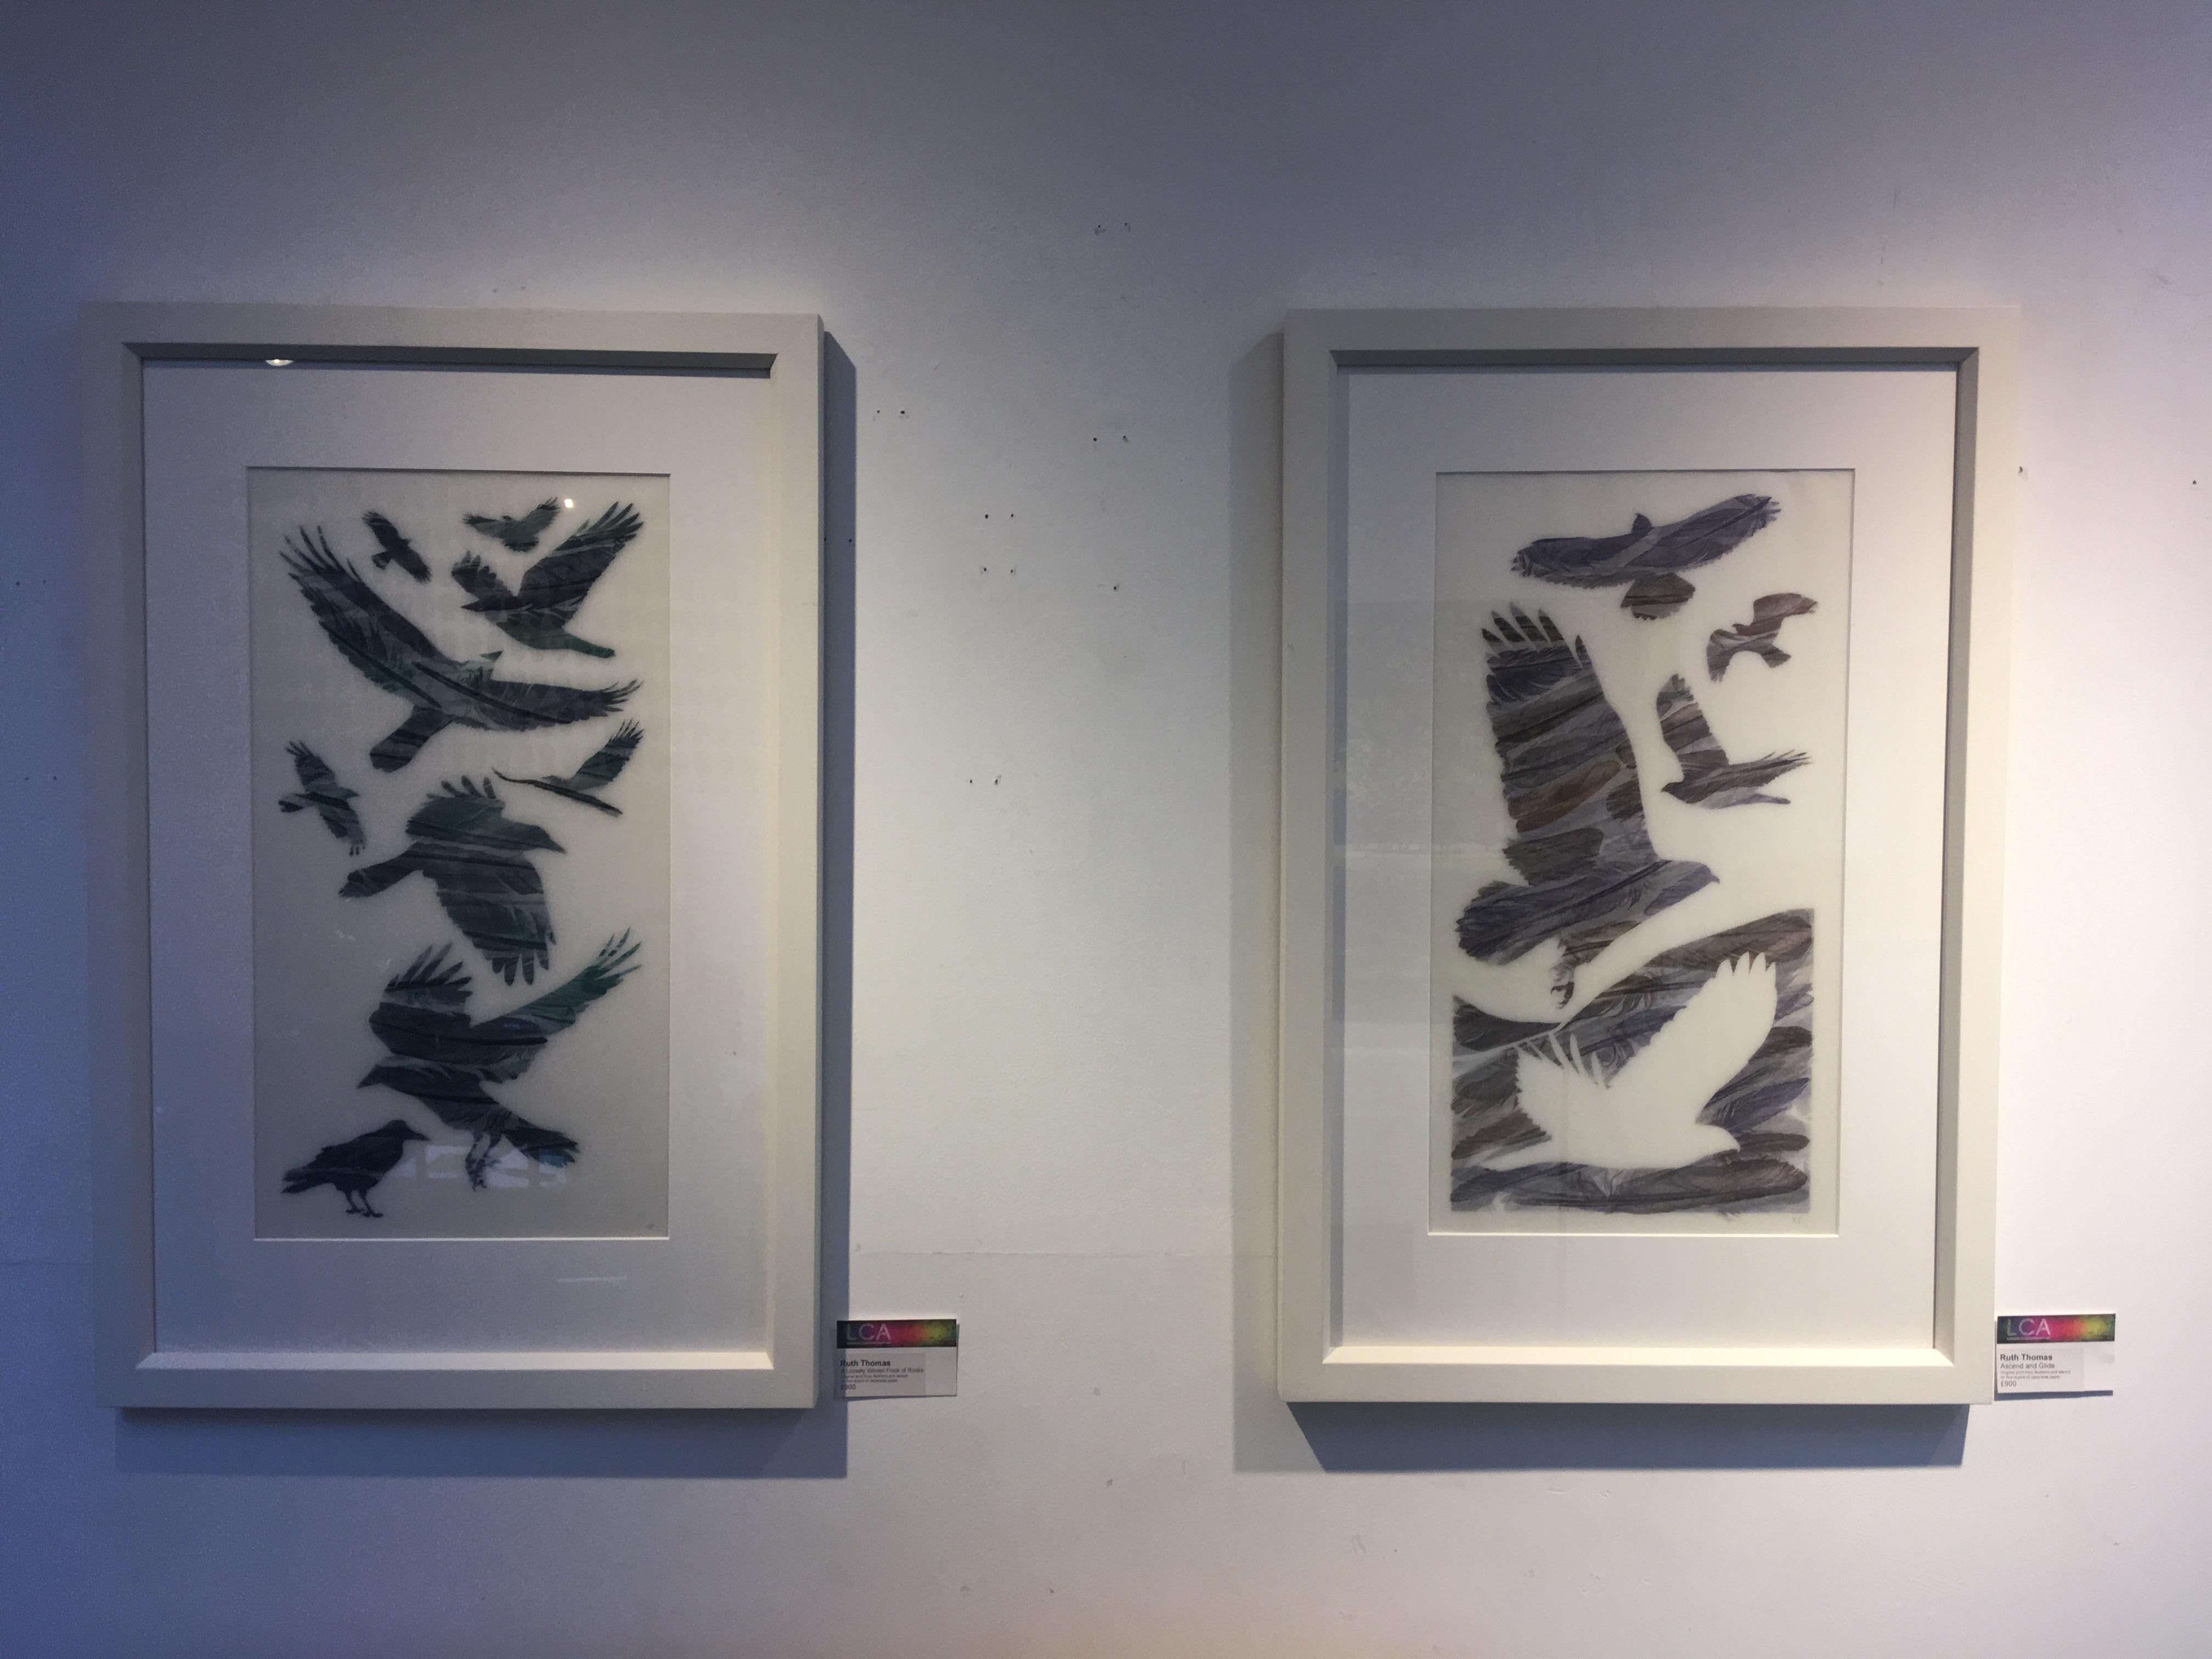 Original print from feathers and stencil on five layers of Japanese paper, limited edition.
Framed size: 75 x 50 cm

Artist's information:
Ruth Thomas RCA is a contemporary printmaker based in North Wales. She makes original prints inspired by